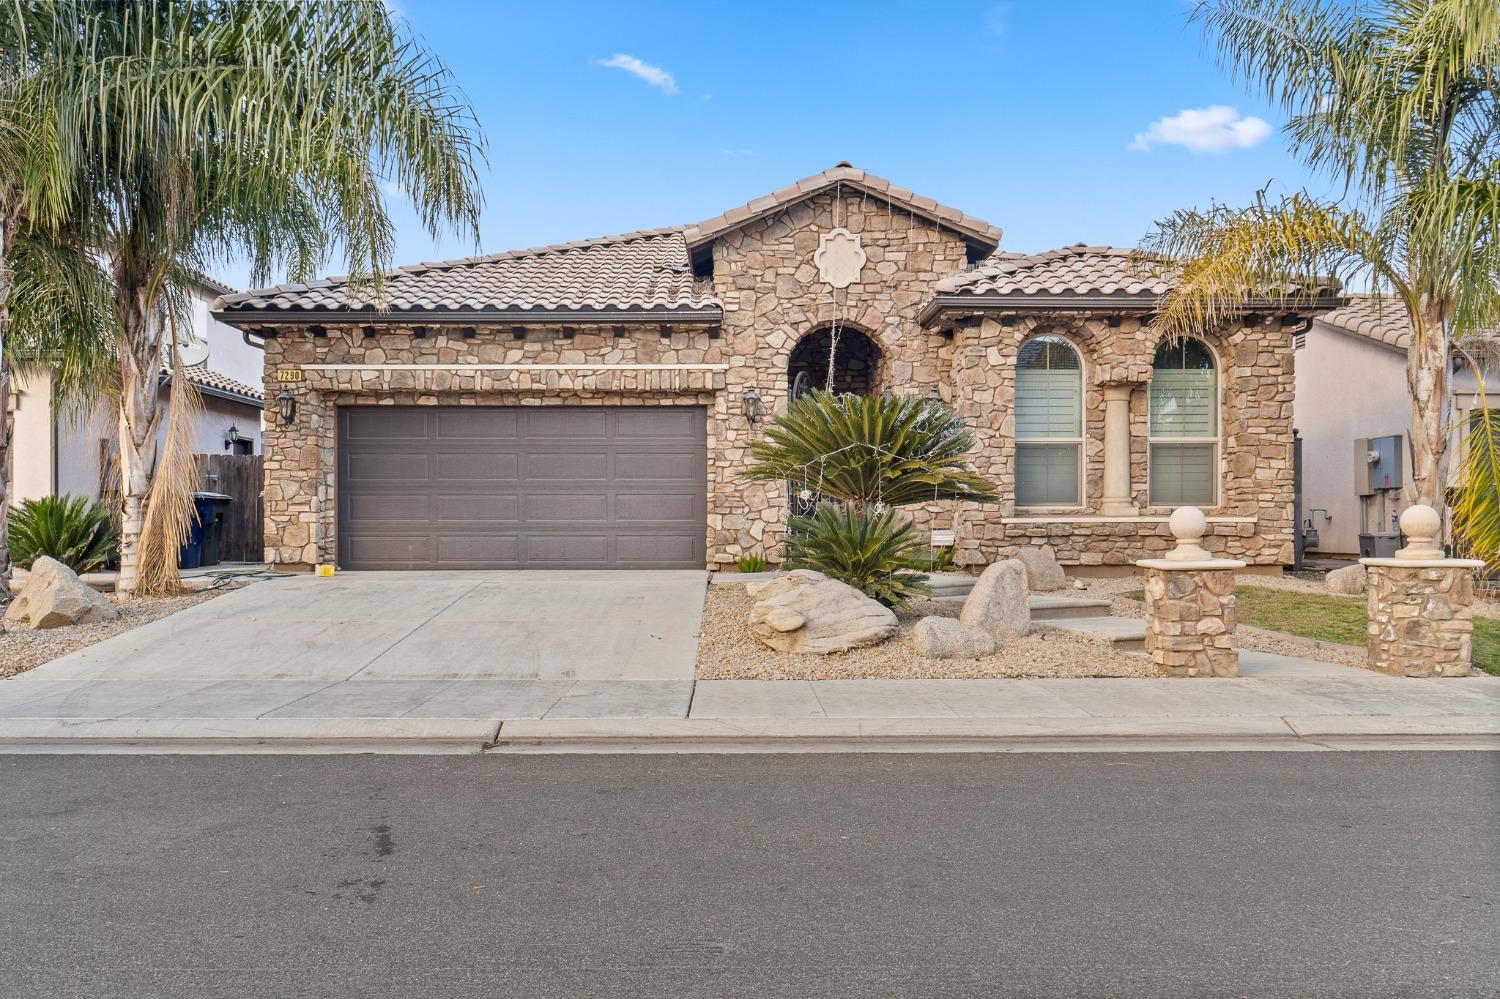 Schedule your tour of this beautiful 4 bedroom 3 bath home built by Granville Homes. Located in Central School Dist. Easy access to HWY 99 and El Paseo shopping center.